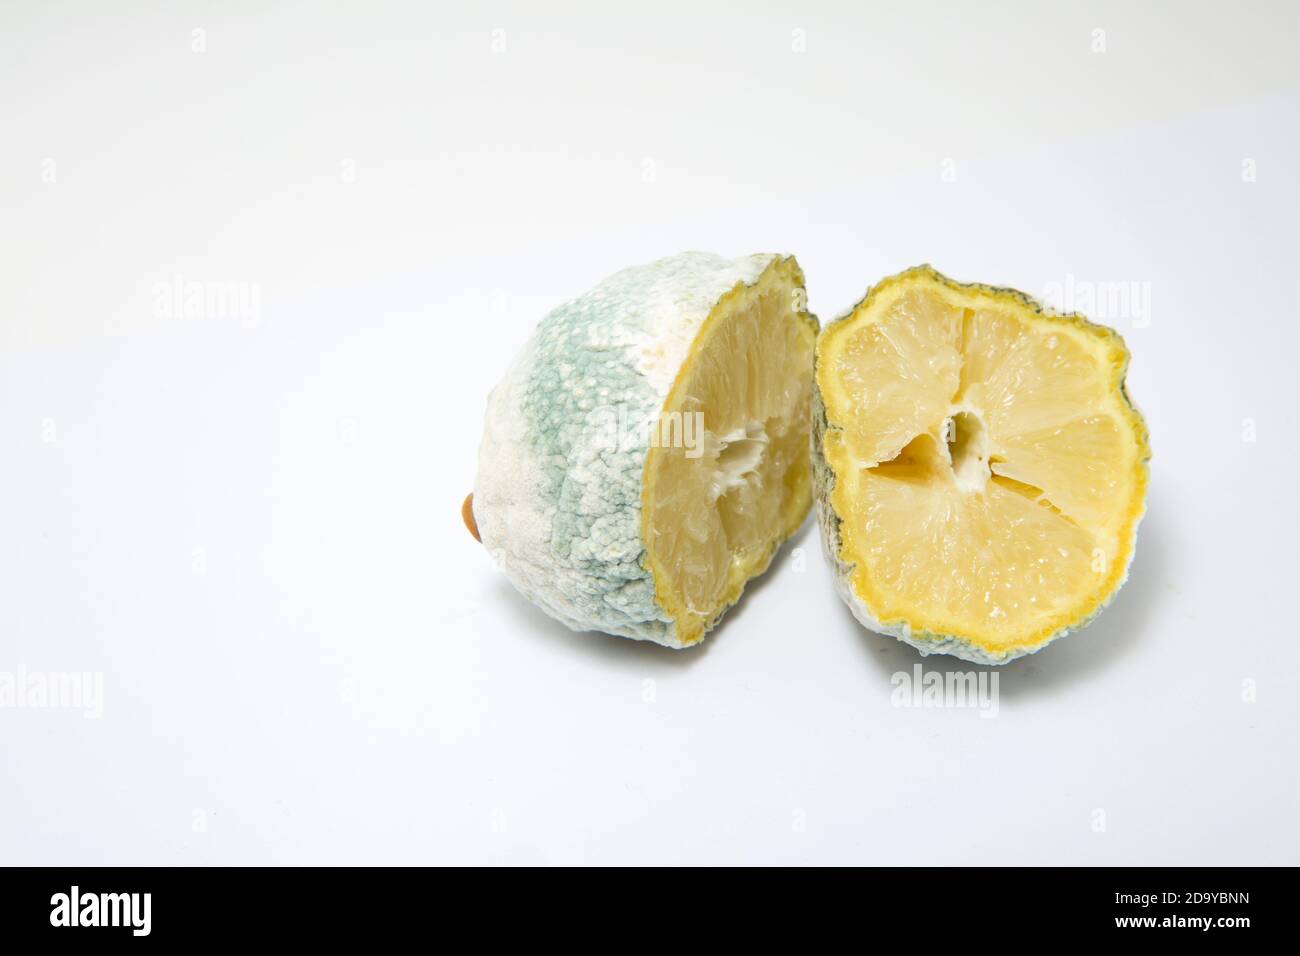 A lemon that has gone mouldy photographed on a white background. England UK GB Stock Photo